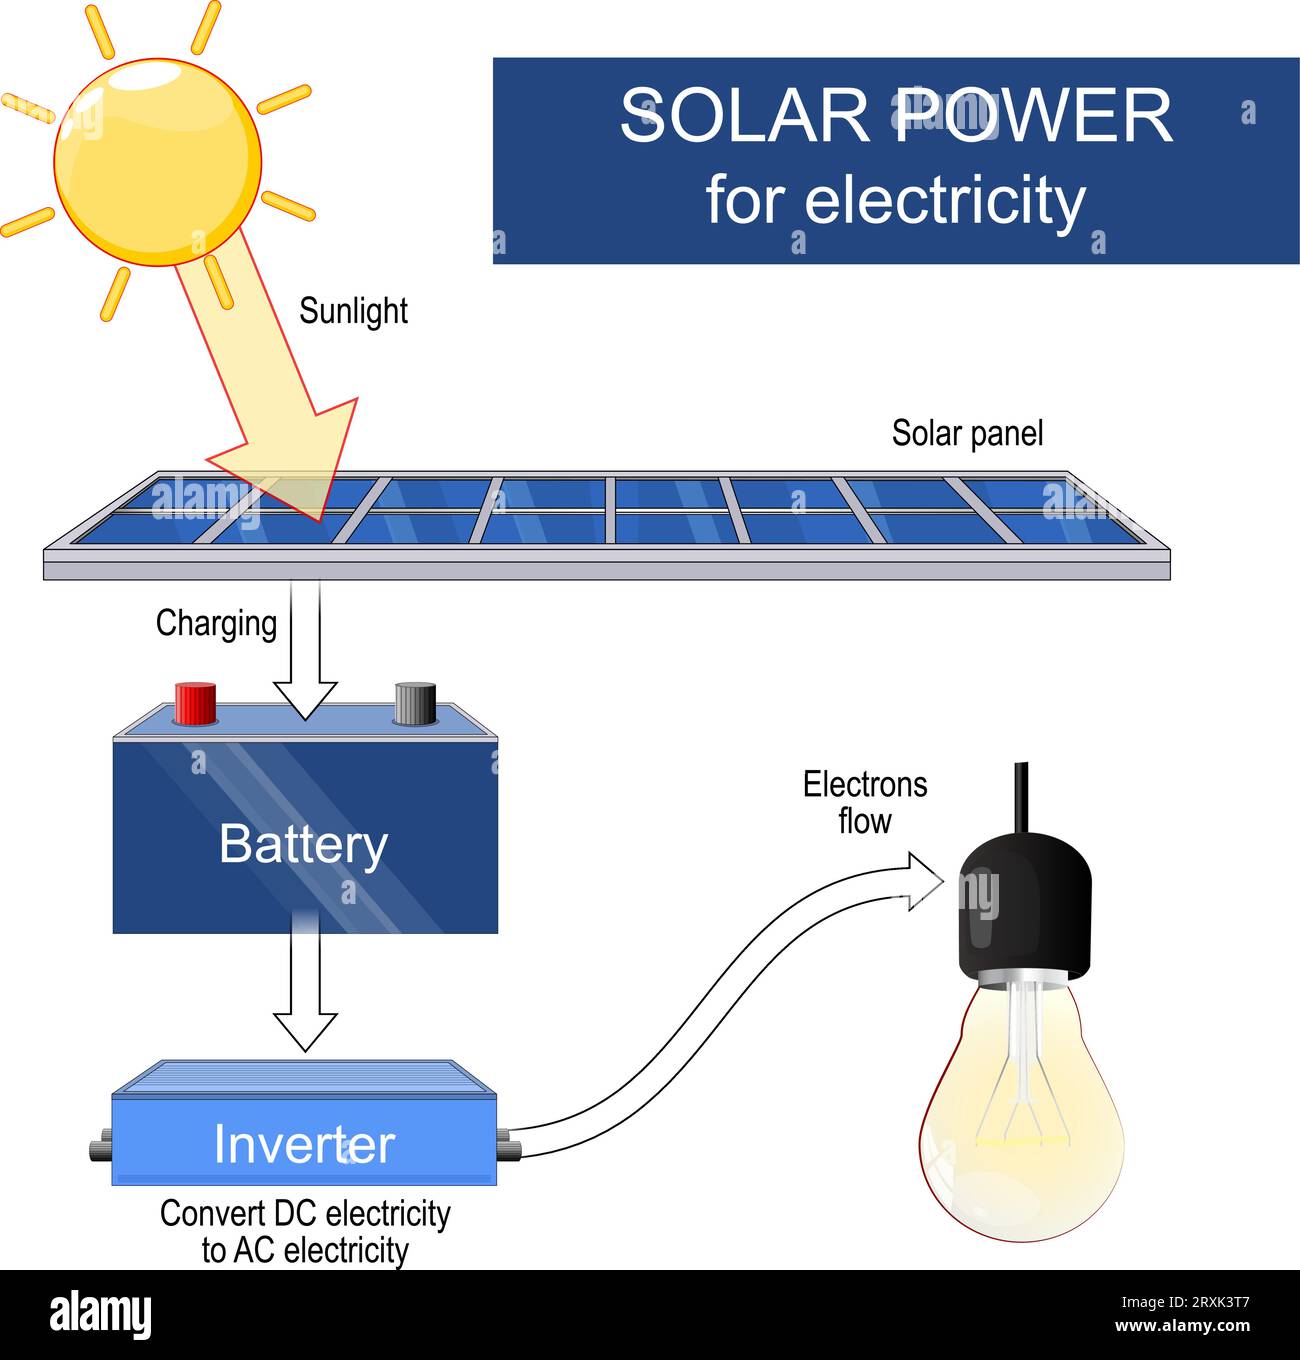 solar energy. A solar panel converts sunlight into electricity. chain of converting sunlight using a solar panel, battery, inverter into light of bulb Stock Vector